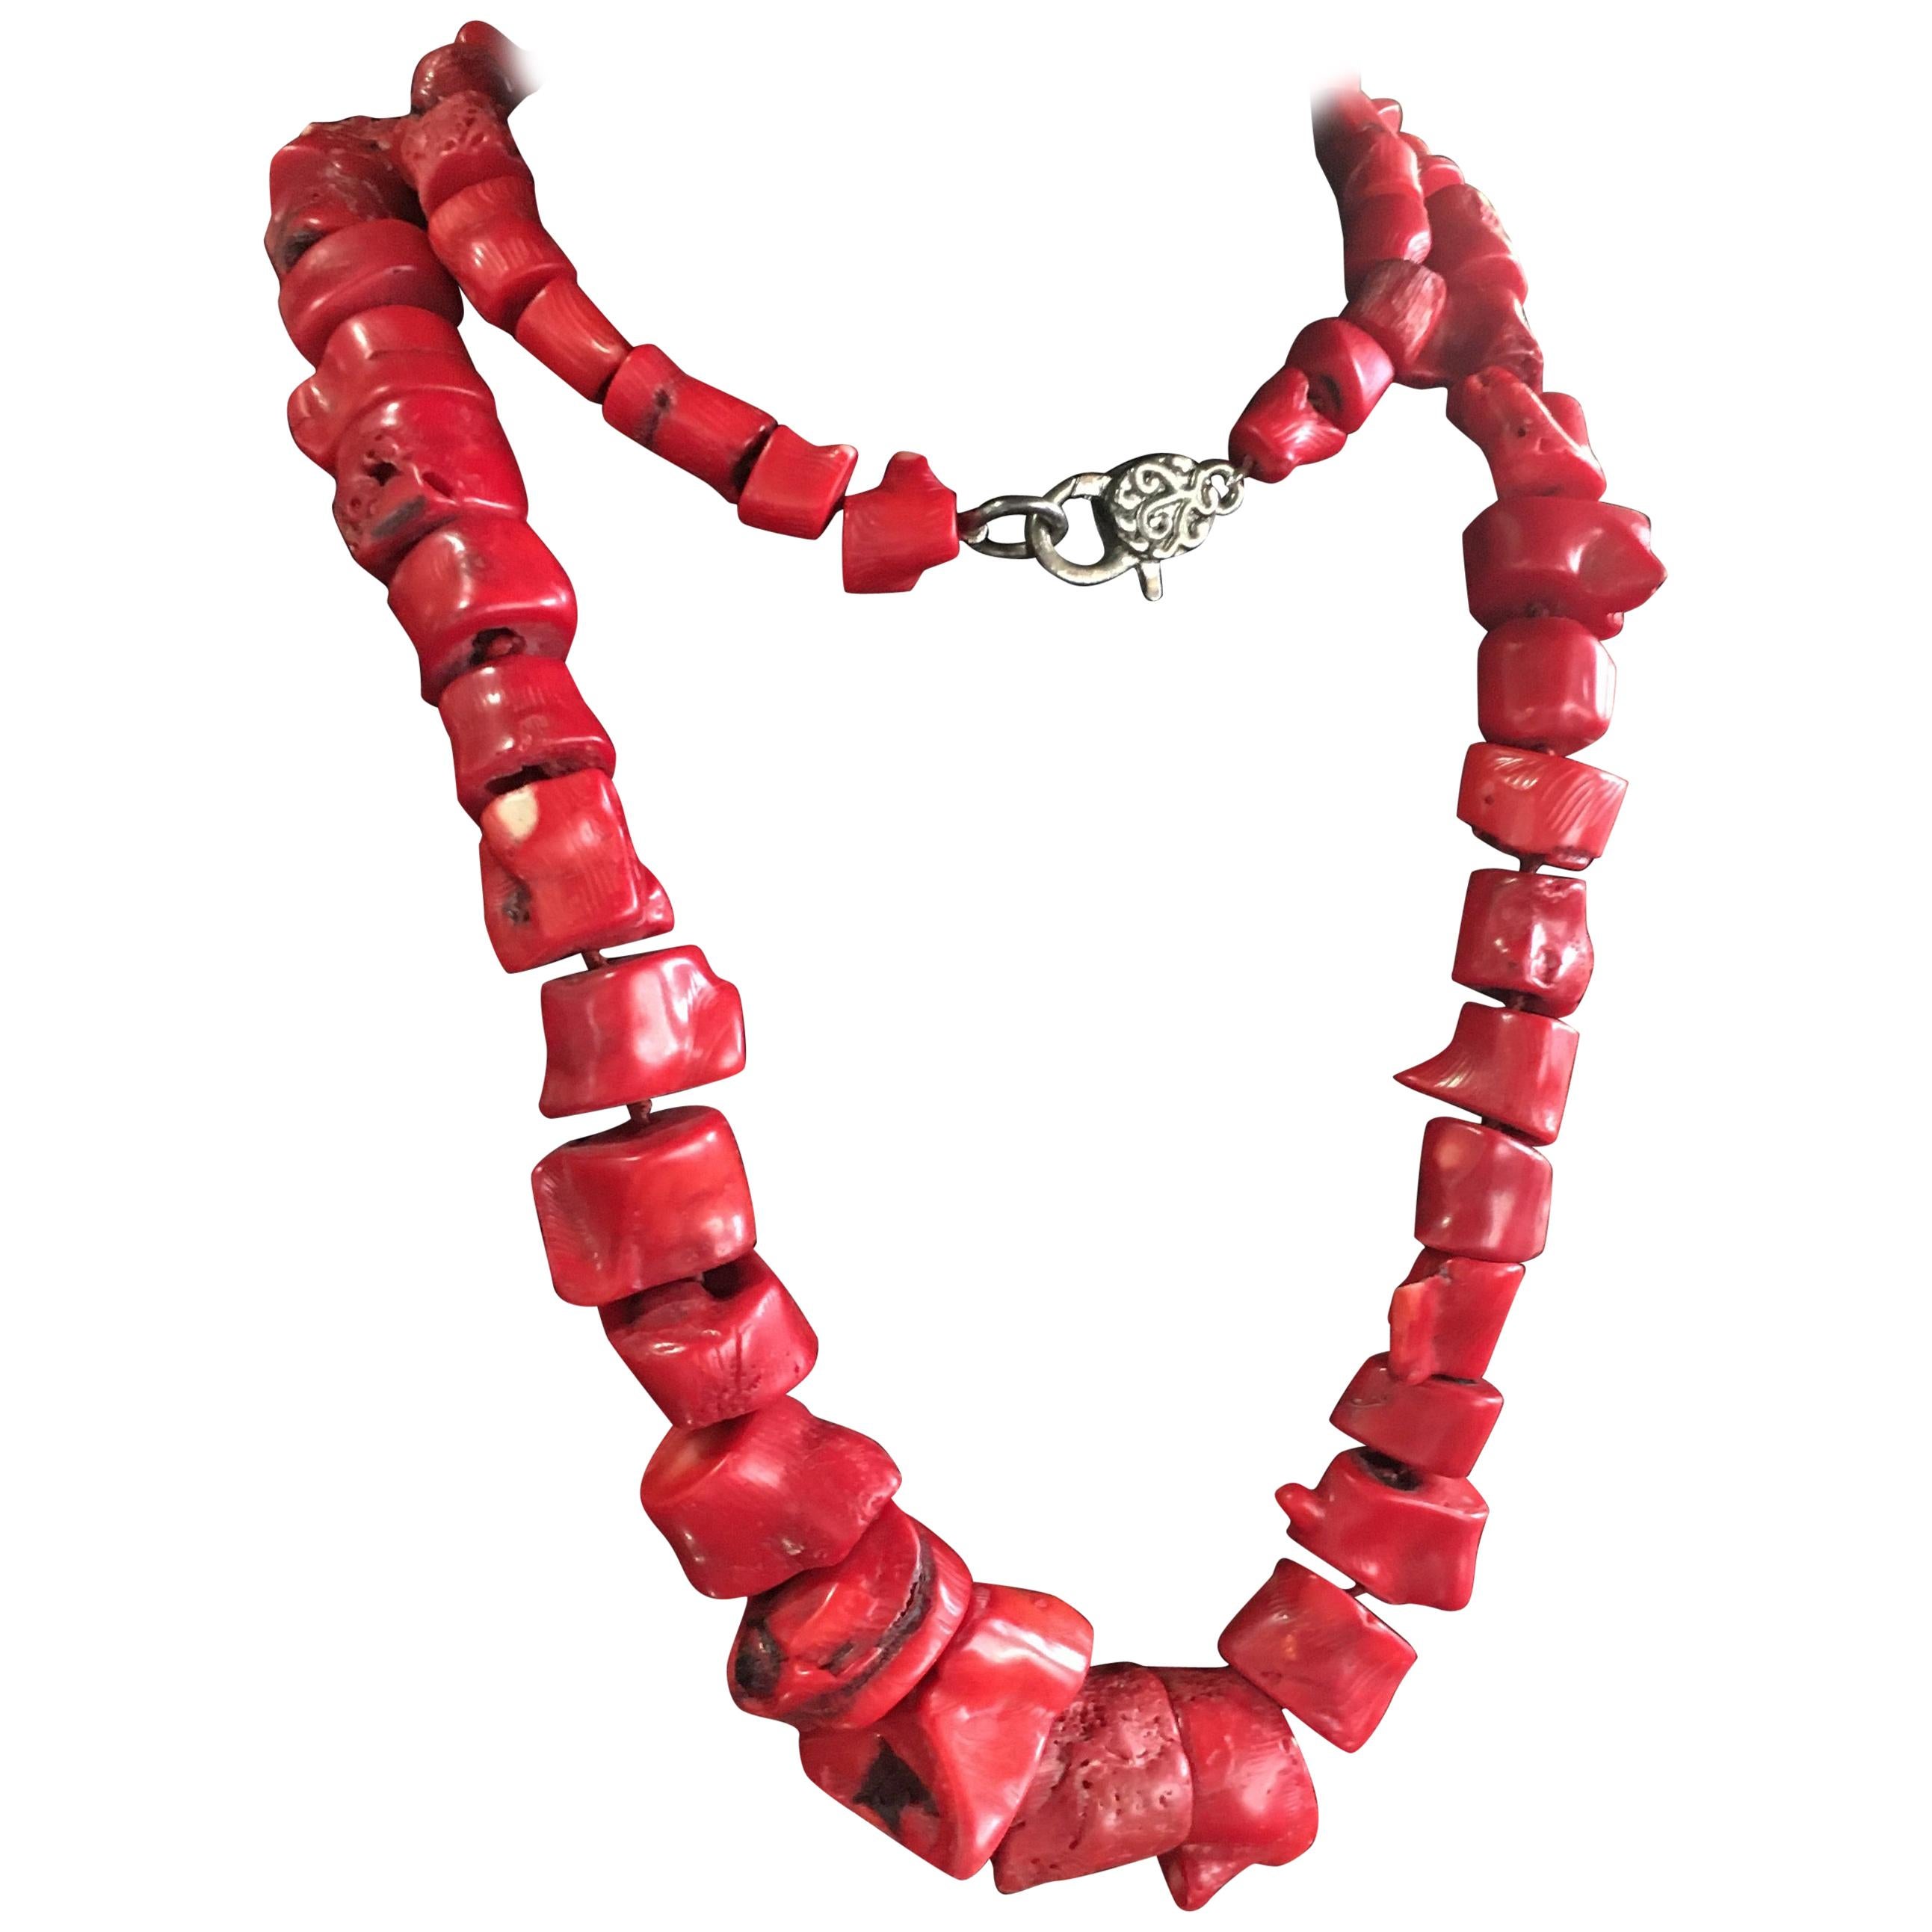 Exquisite Chunky Coral Necklace, Great Color And Proportion. Iris Apfel Style.